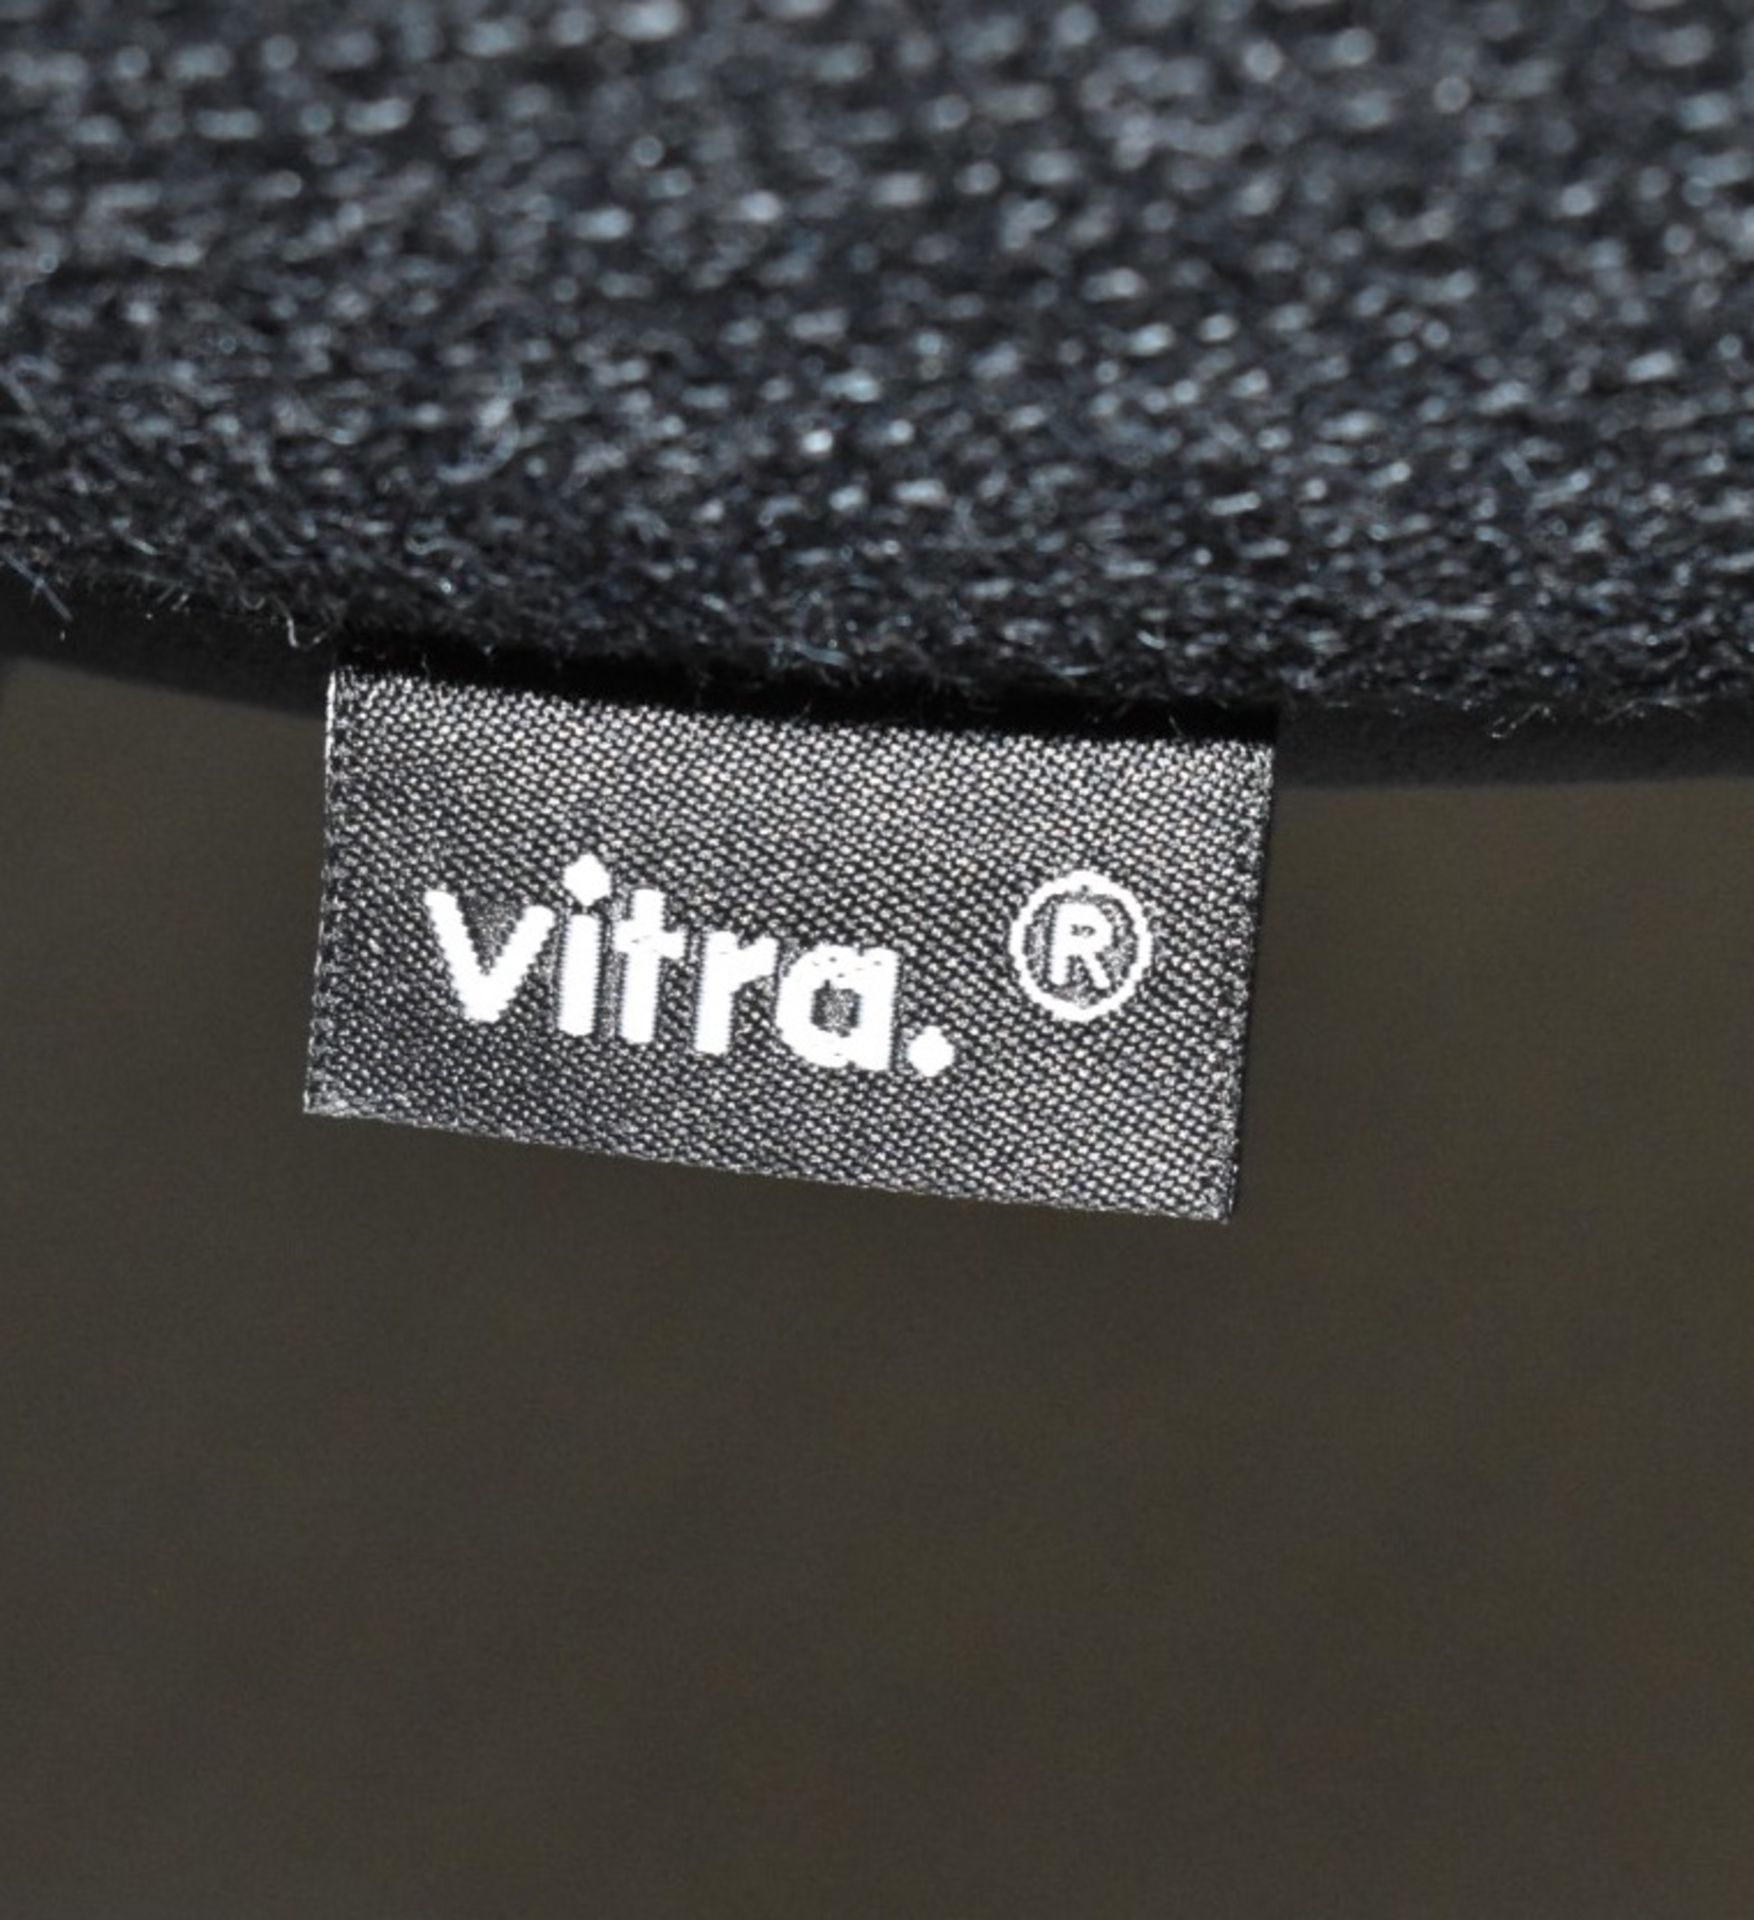 1 x VITRA 'Softshell' Fabric Upholstered Designer Plastic Armchair, in Anthracite Grey - RRP £885.00 - Image 8 of 9